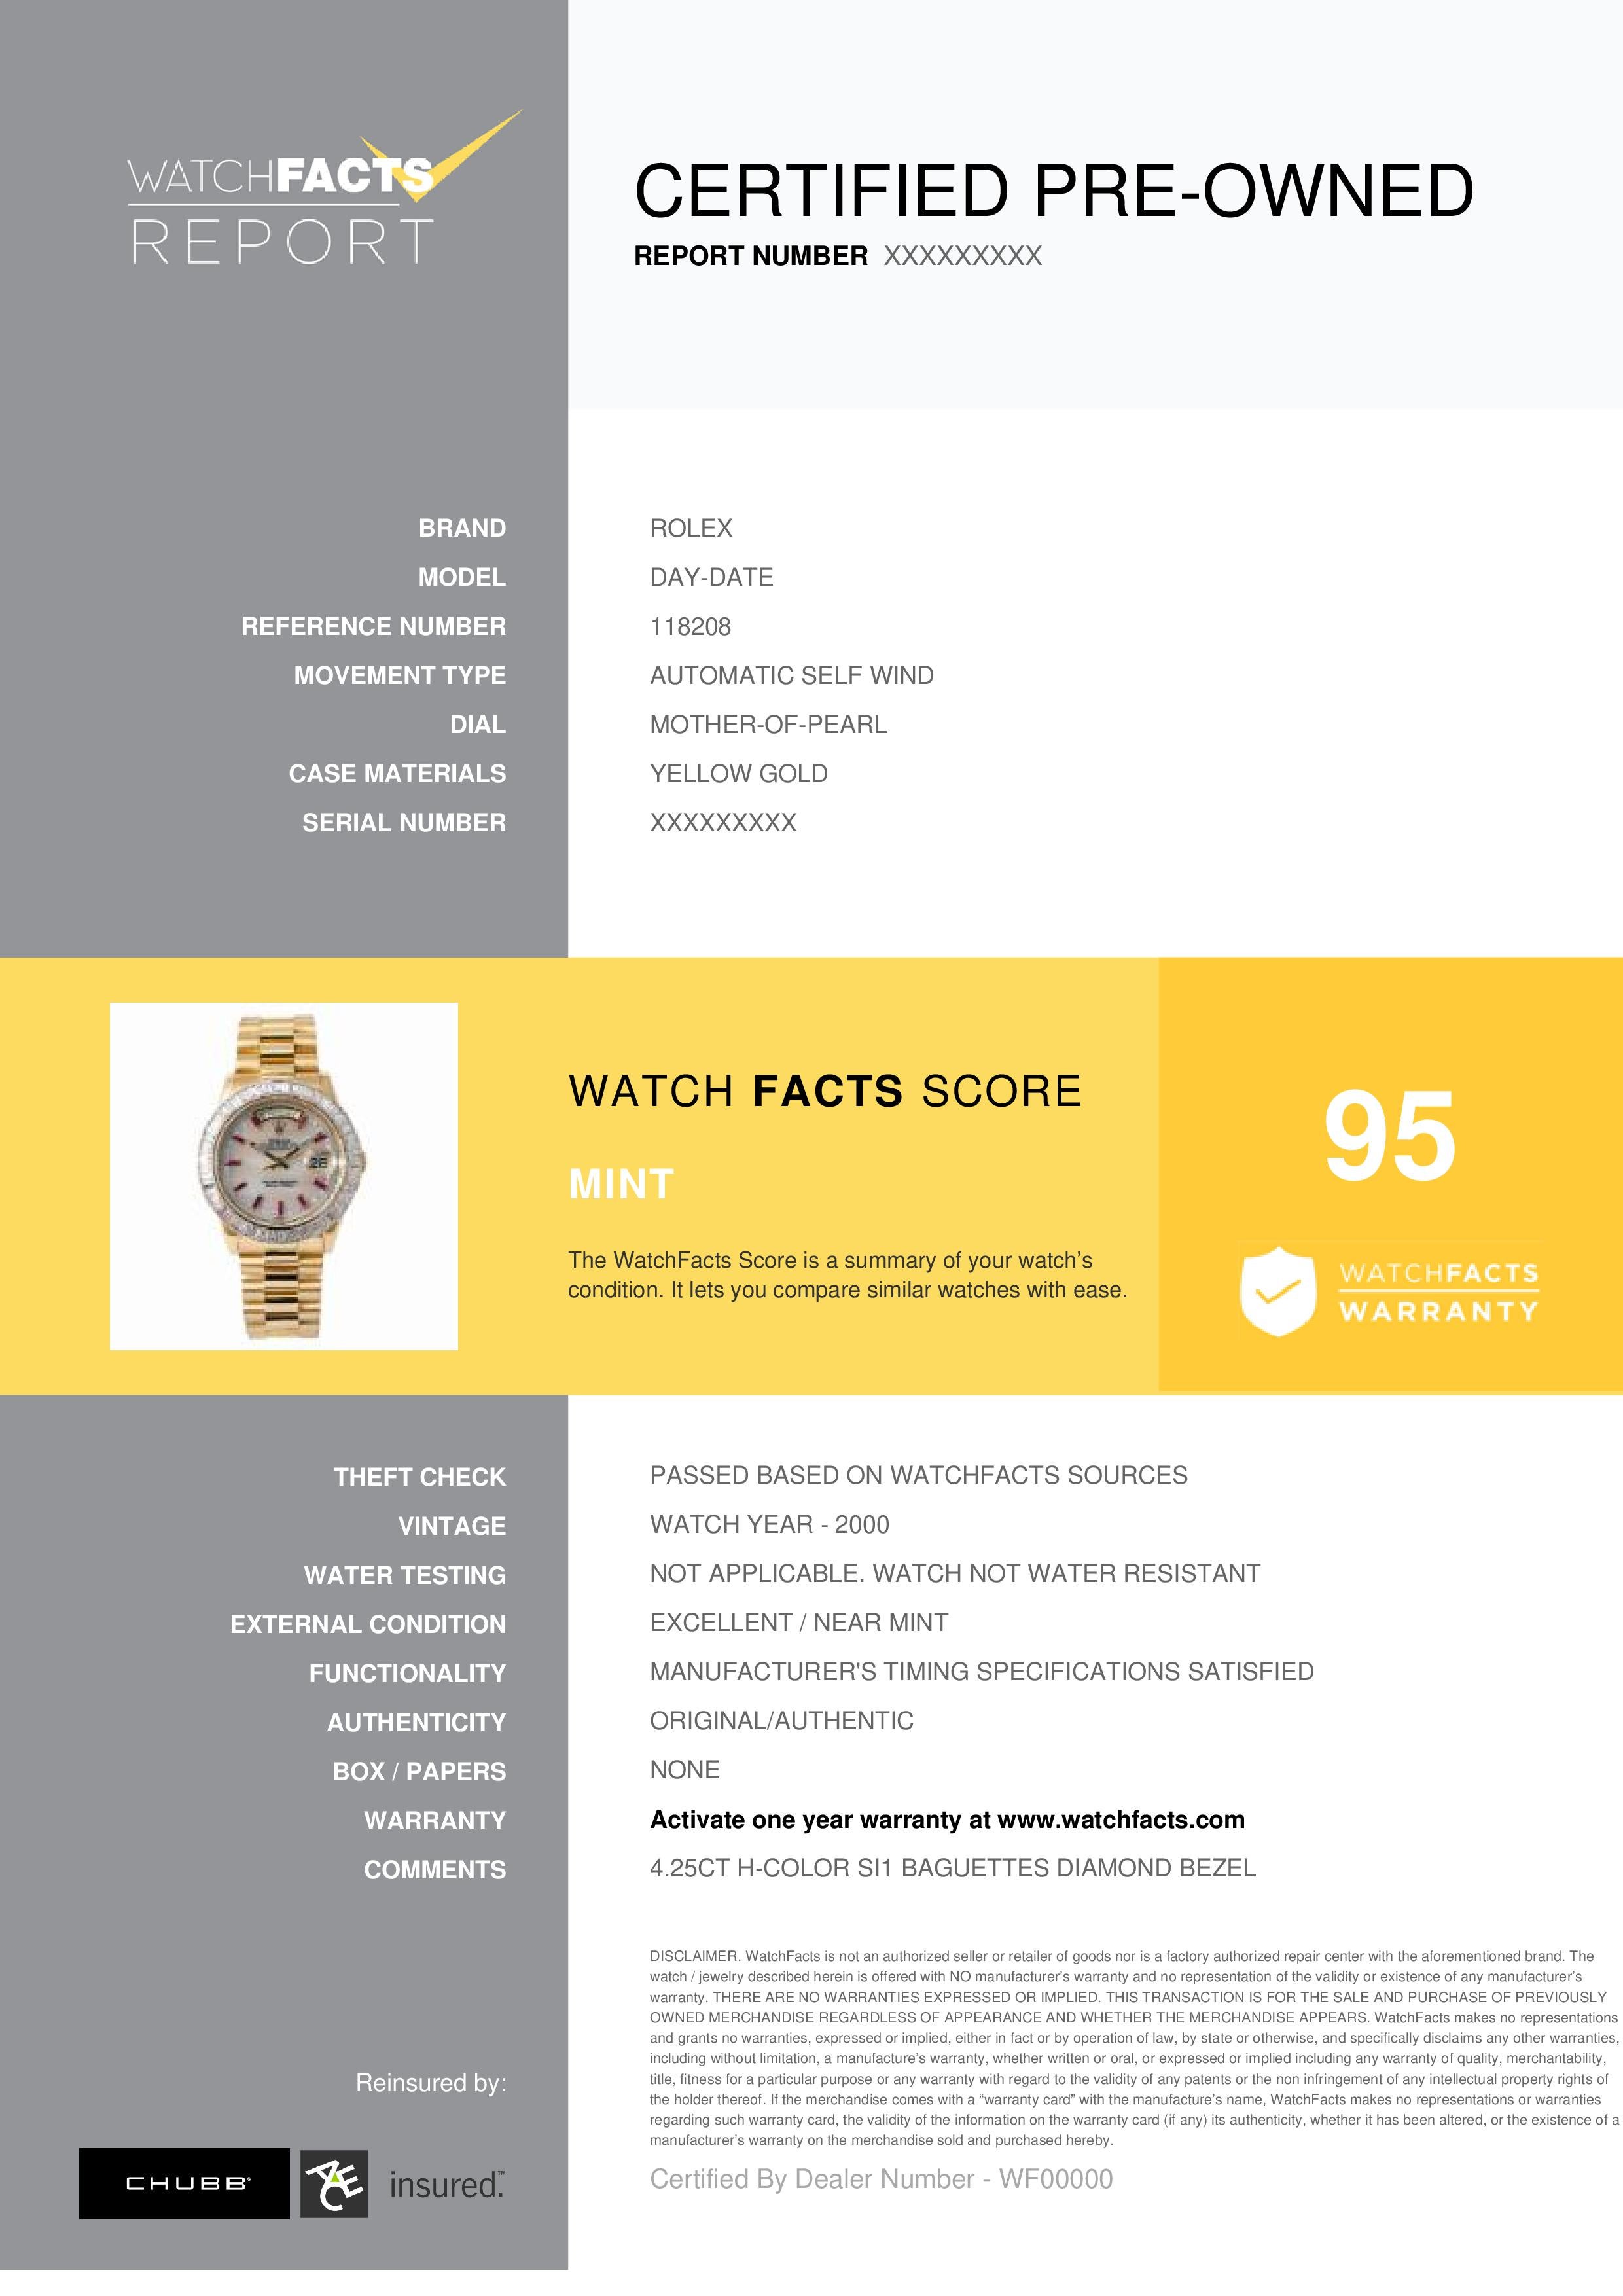 Rolex Day-Date Reference #: 118208. Mens Automatic Self Wind Watch Yellow Gold Mother of Pearl 38 MM. Verified and Certified by WatchFacts. 1 year warranty offered by WatchFacts.
